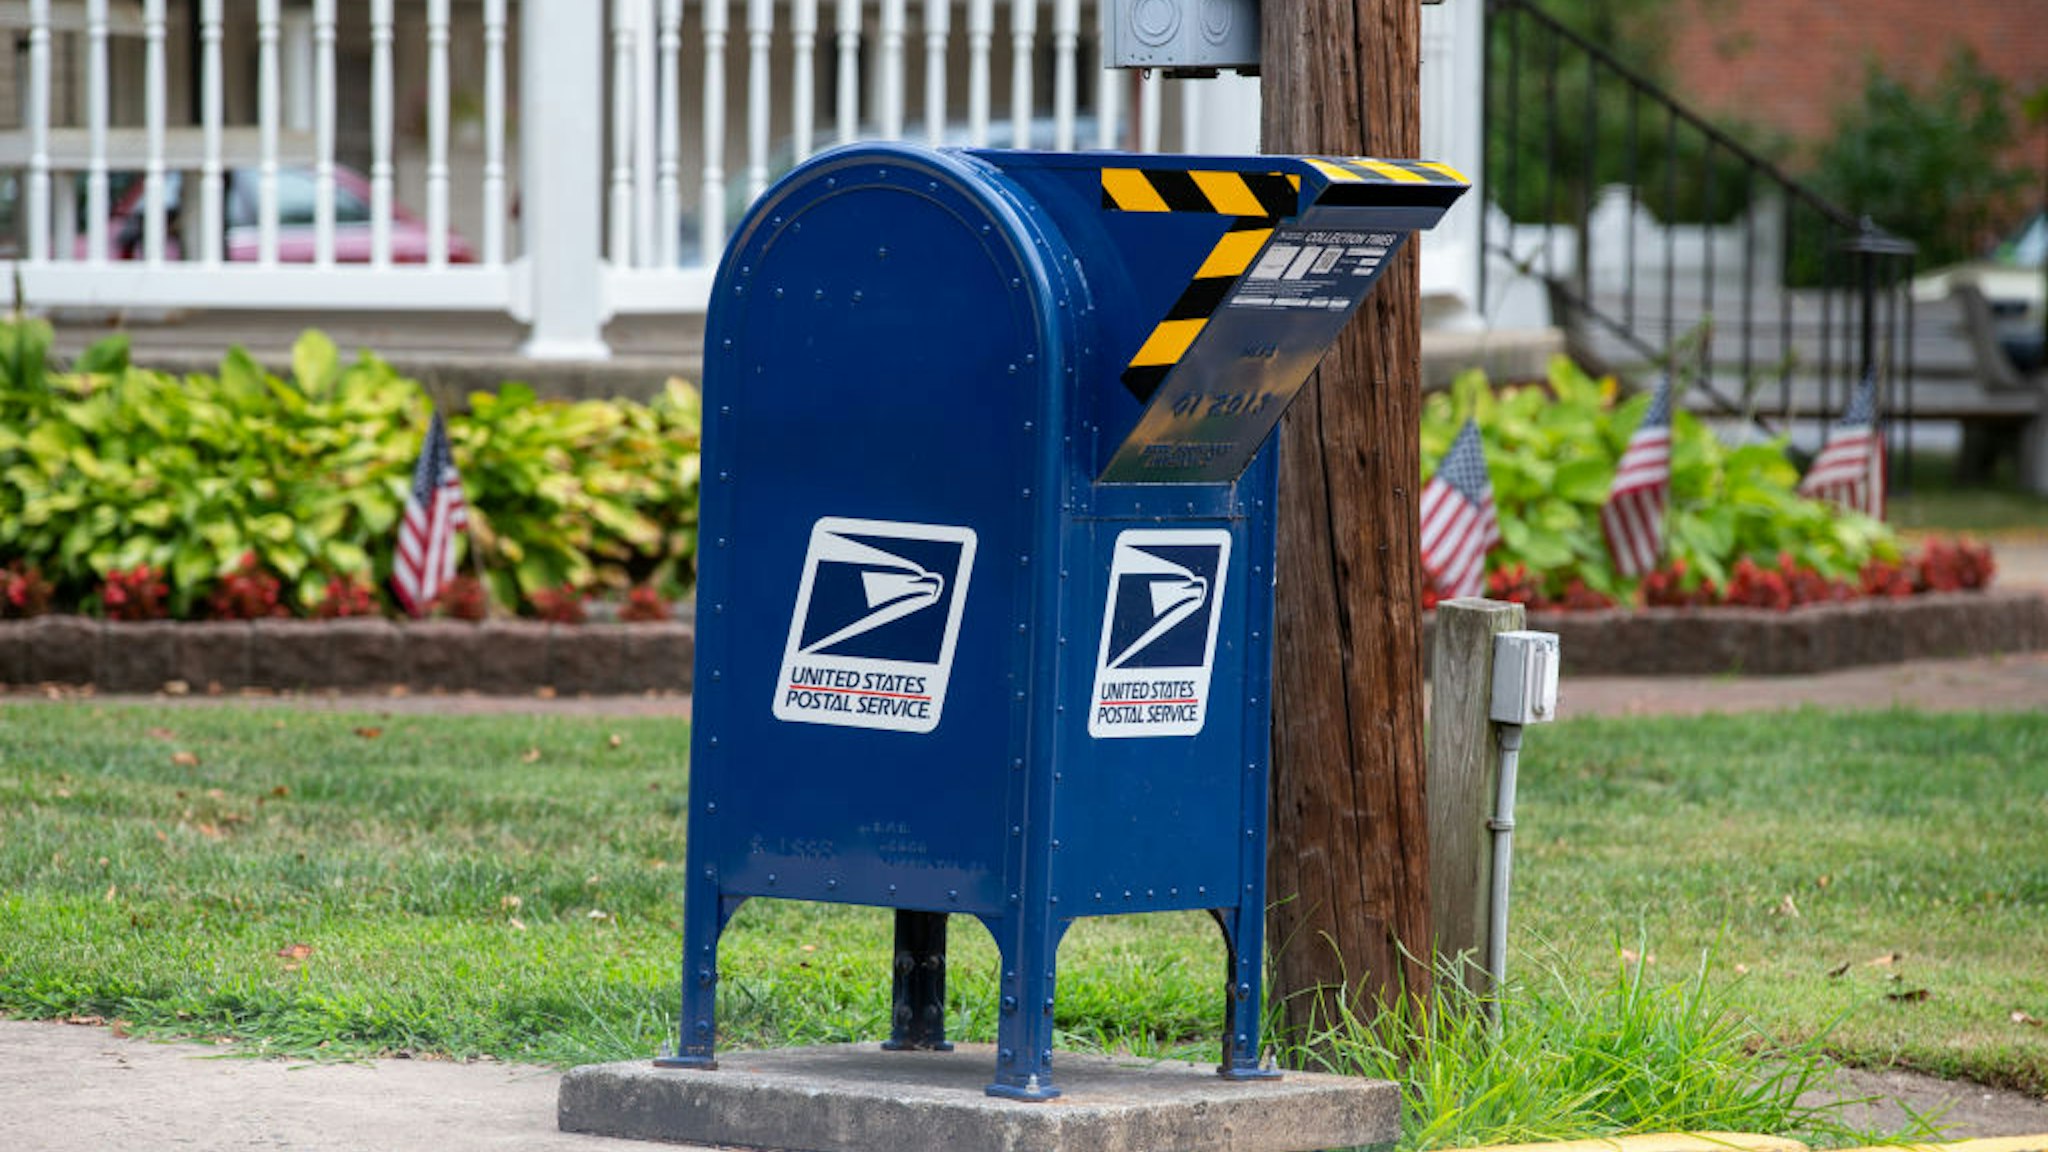 A drive-up United States Postal Service (USPS) mailbox is in King Street Park in Northumberland, Pennsylvania.